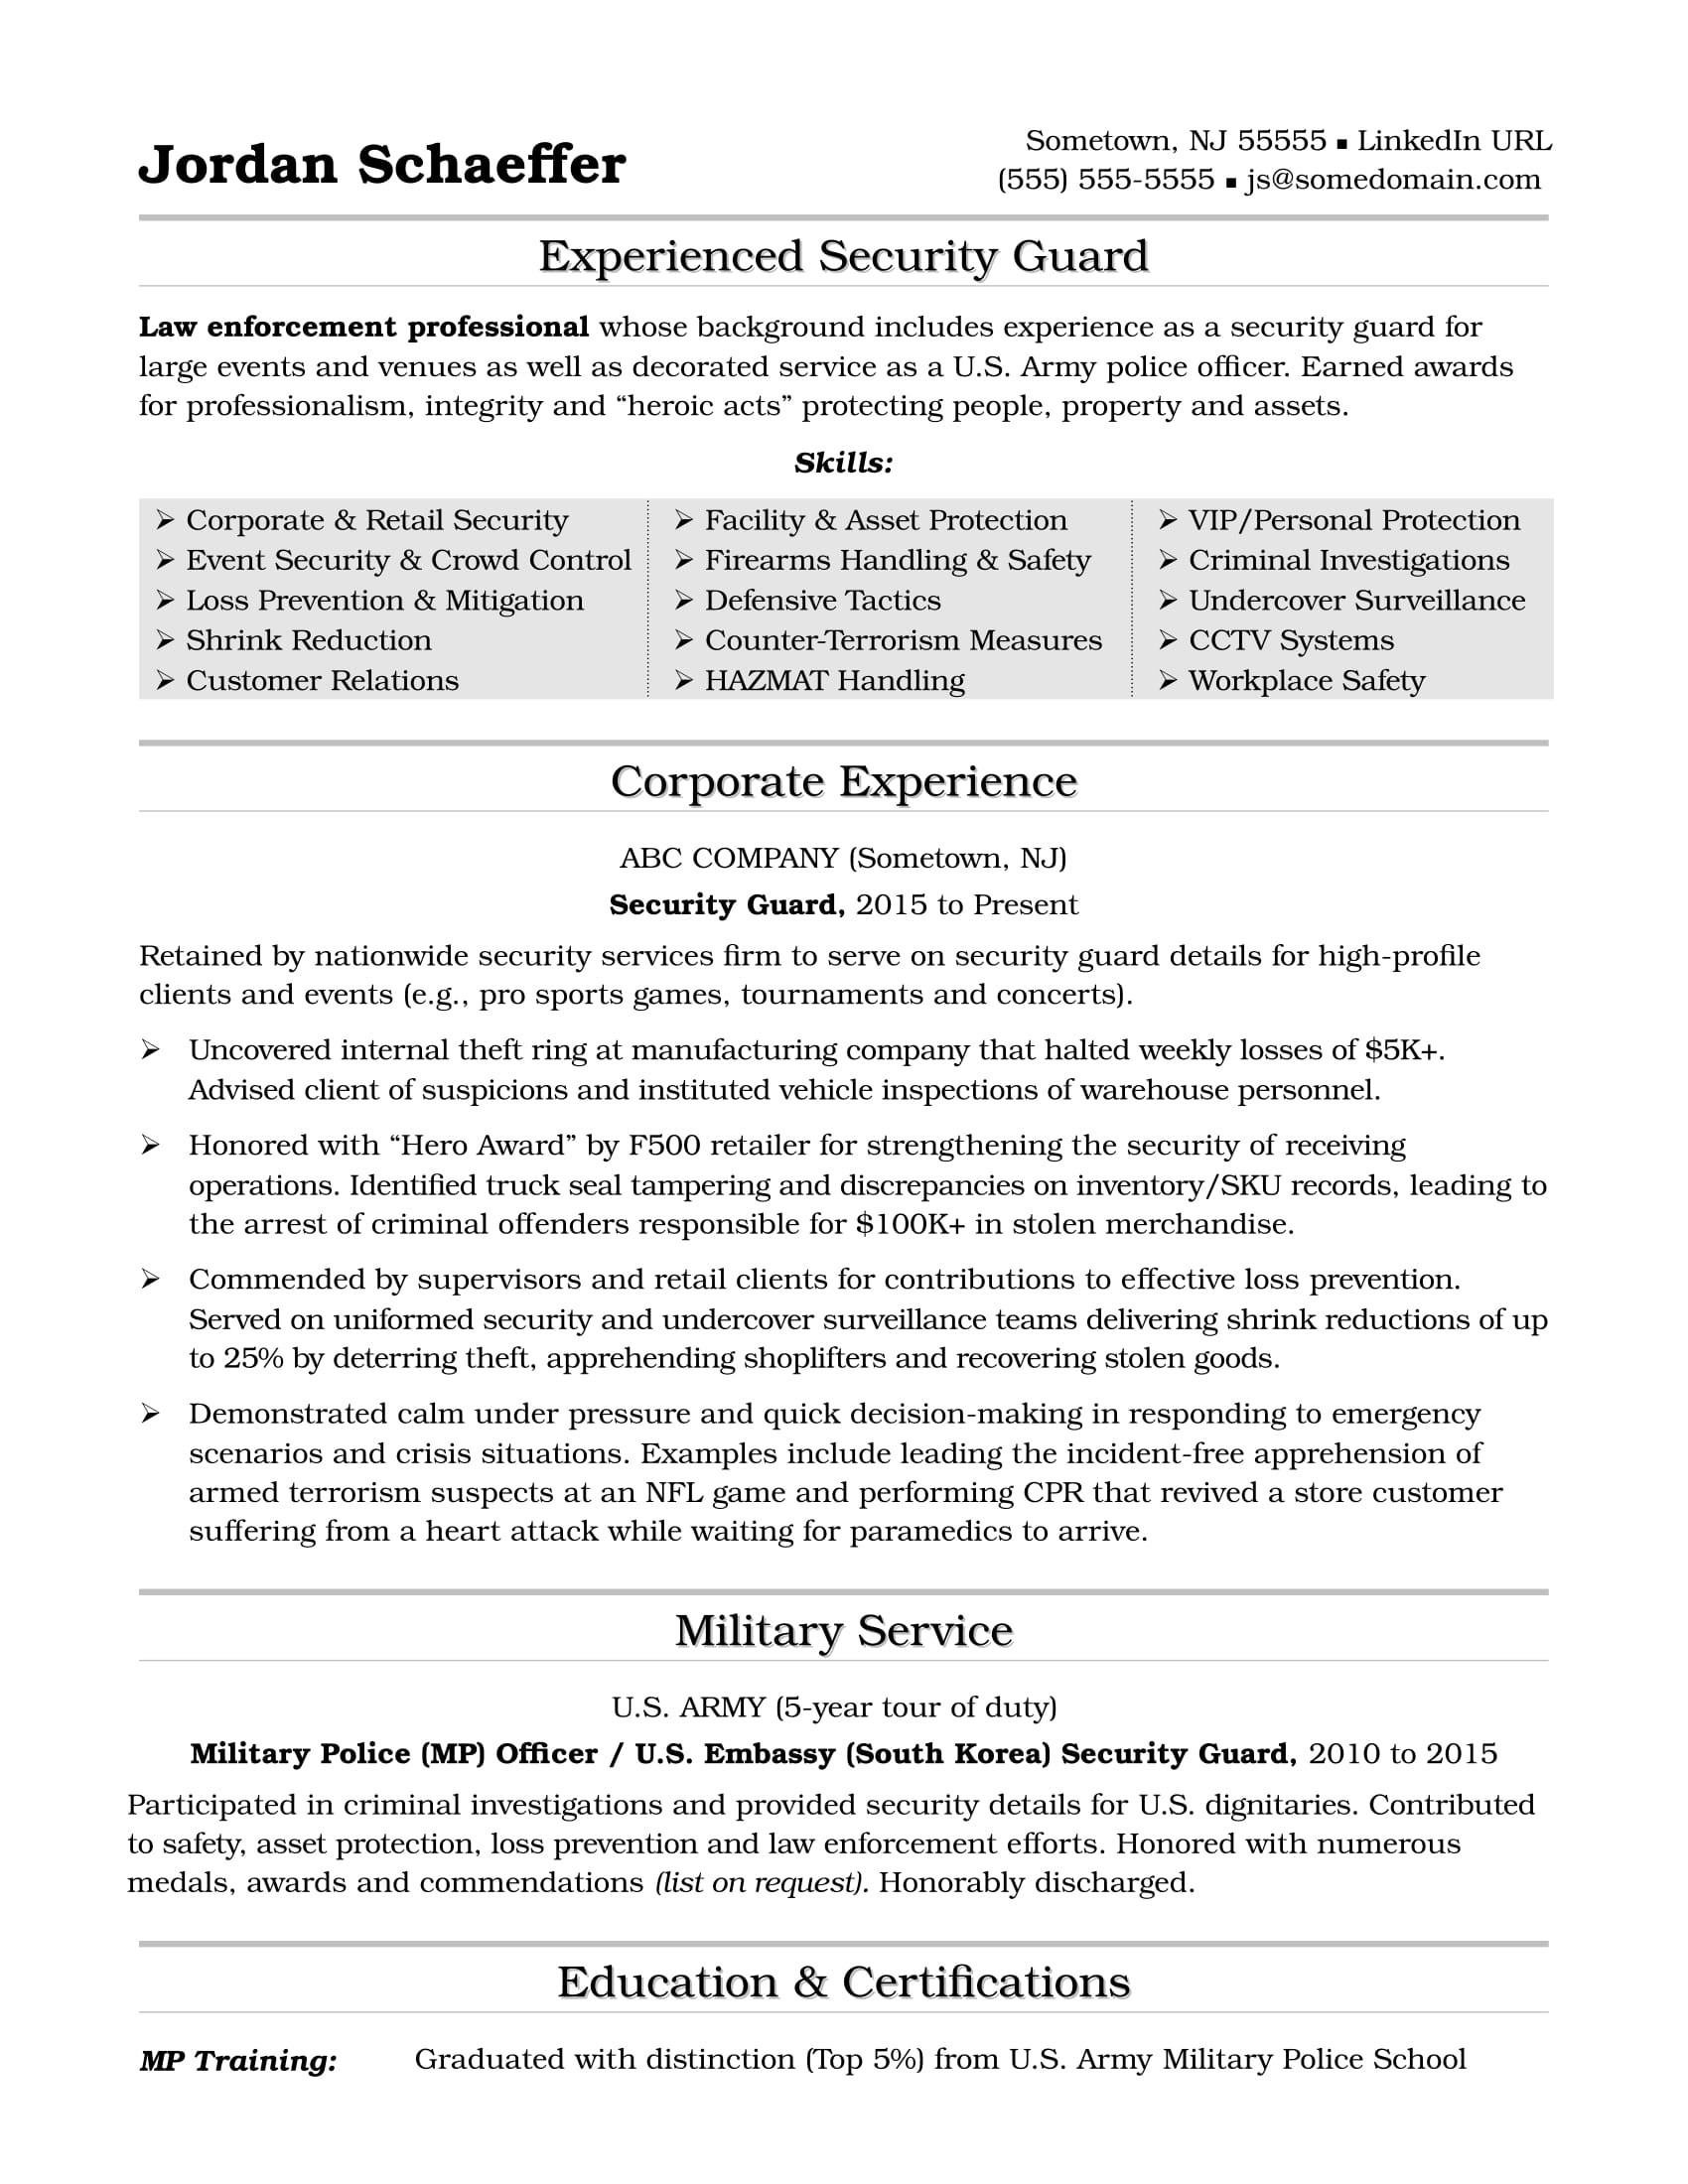 Sample Resume for Security Officer In India Security Guard Resume Sample Monster.com